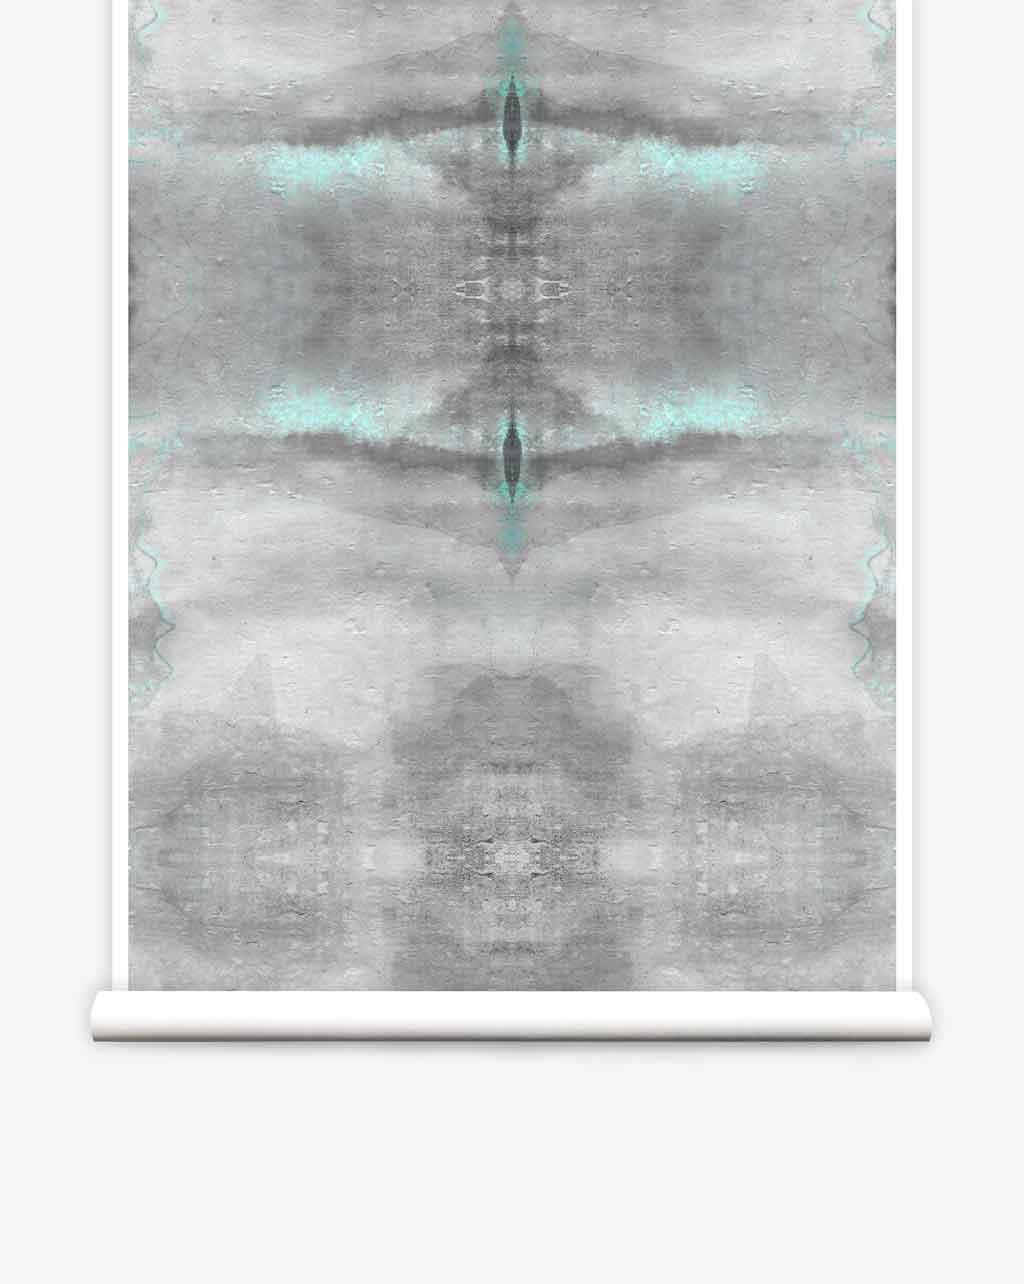 A Poolside Wallpaper with a grey and blue design on it